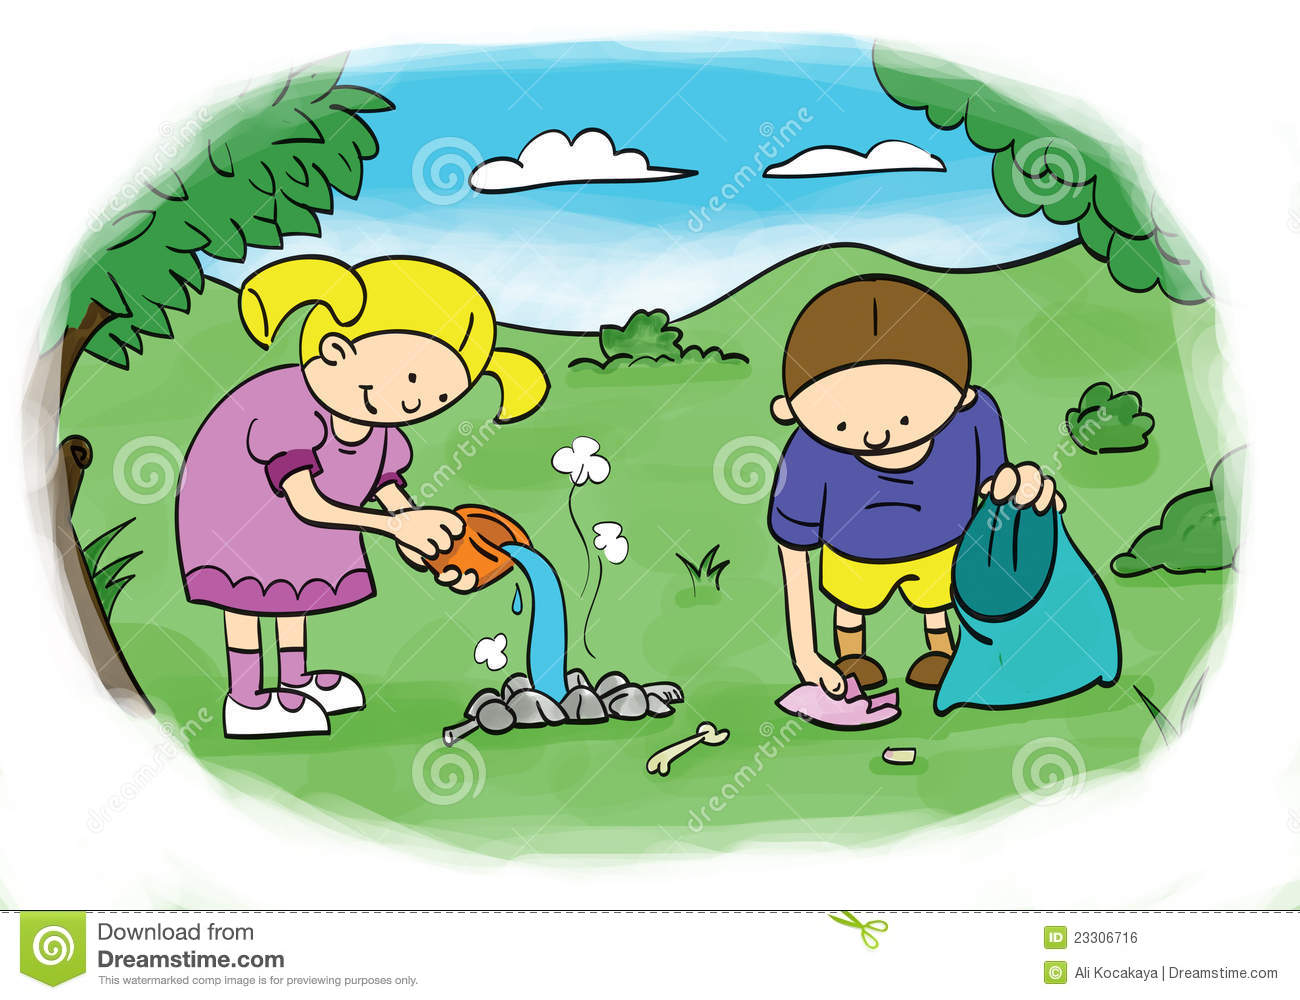 environment clipart cleanliness surroundings